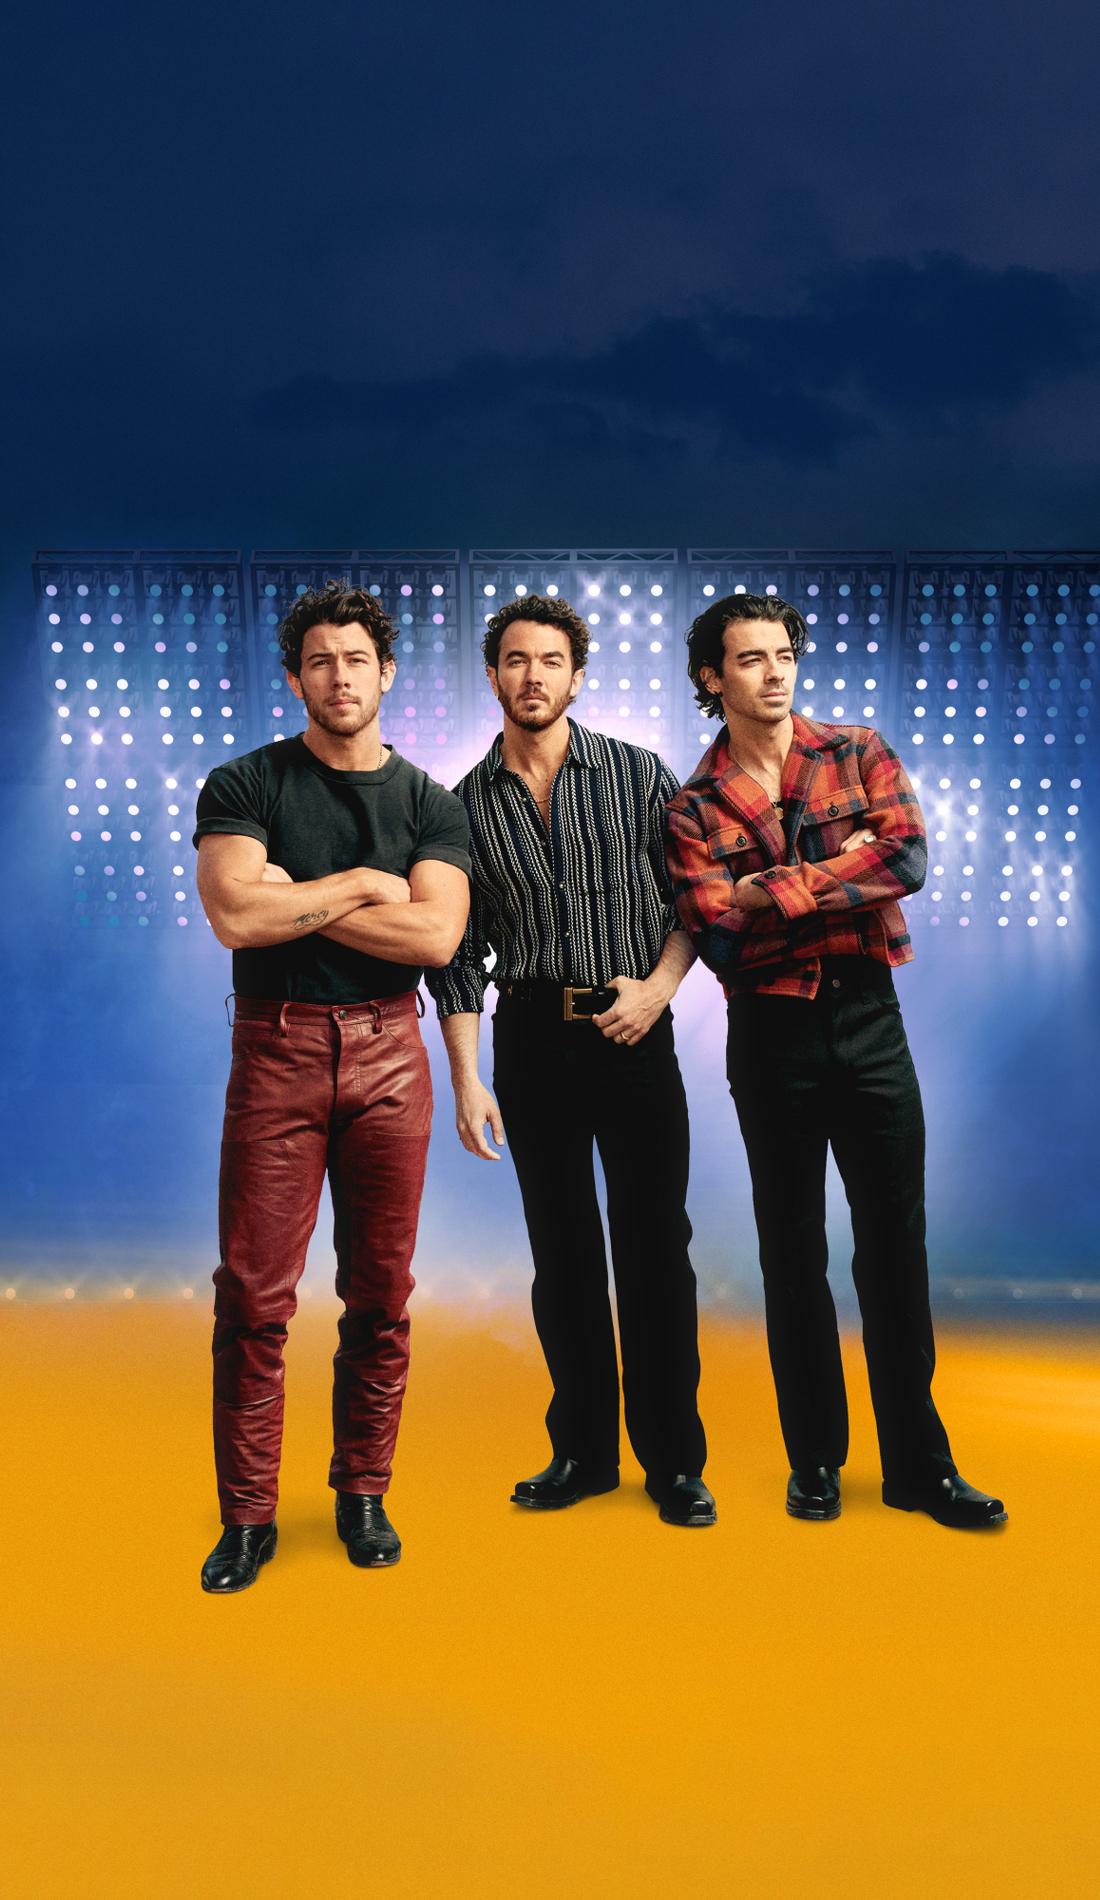 Jonas Brothers on X: Tickets for @RODEOHOUSTON are on sale now